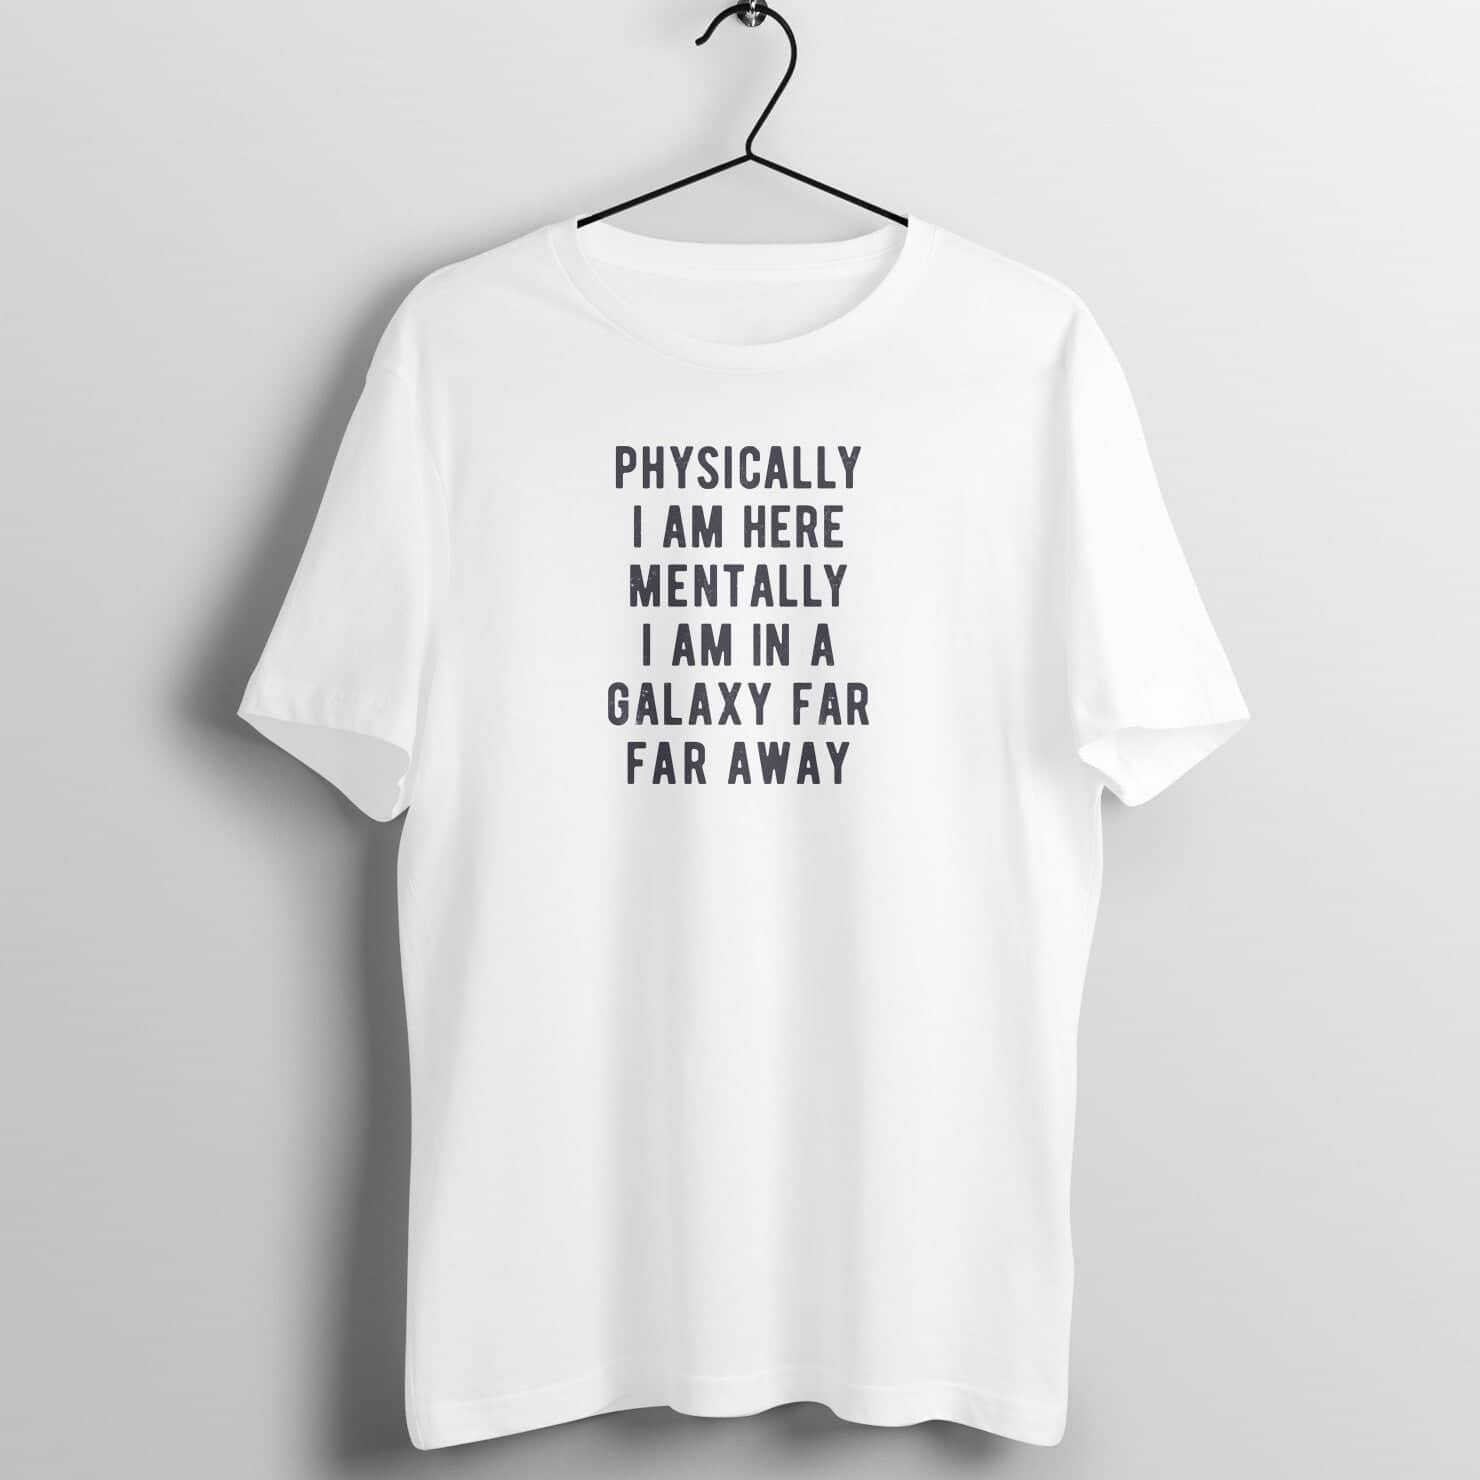 Physically I am Here Mentally I am in a Galaxy far Far Away Funny White T Shirt for Men and Women Printrove White S 